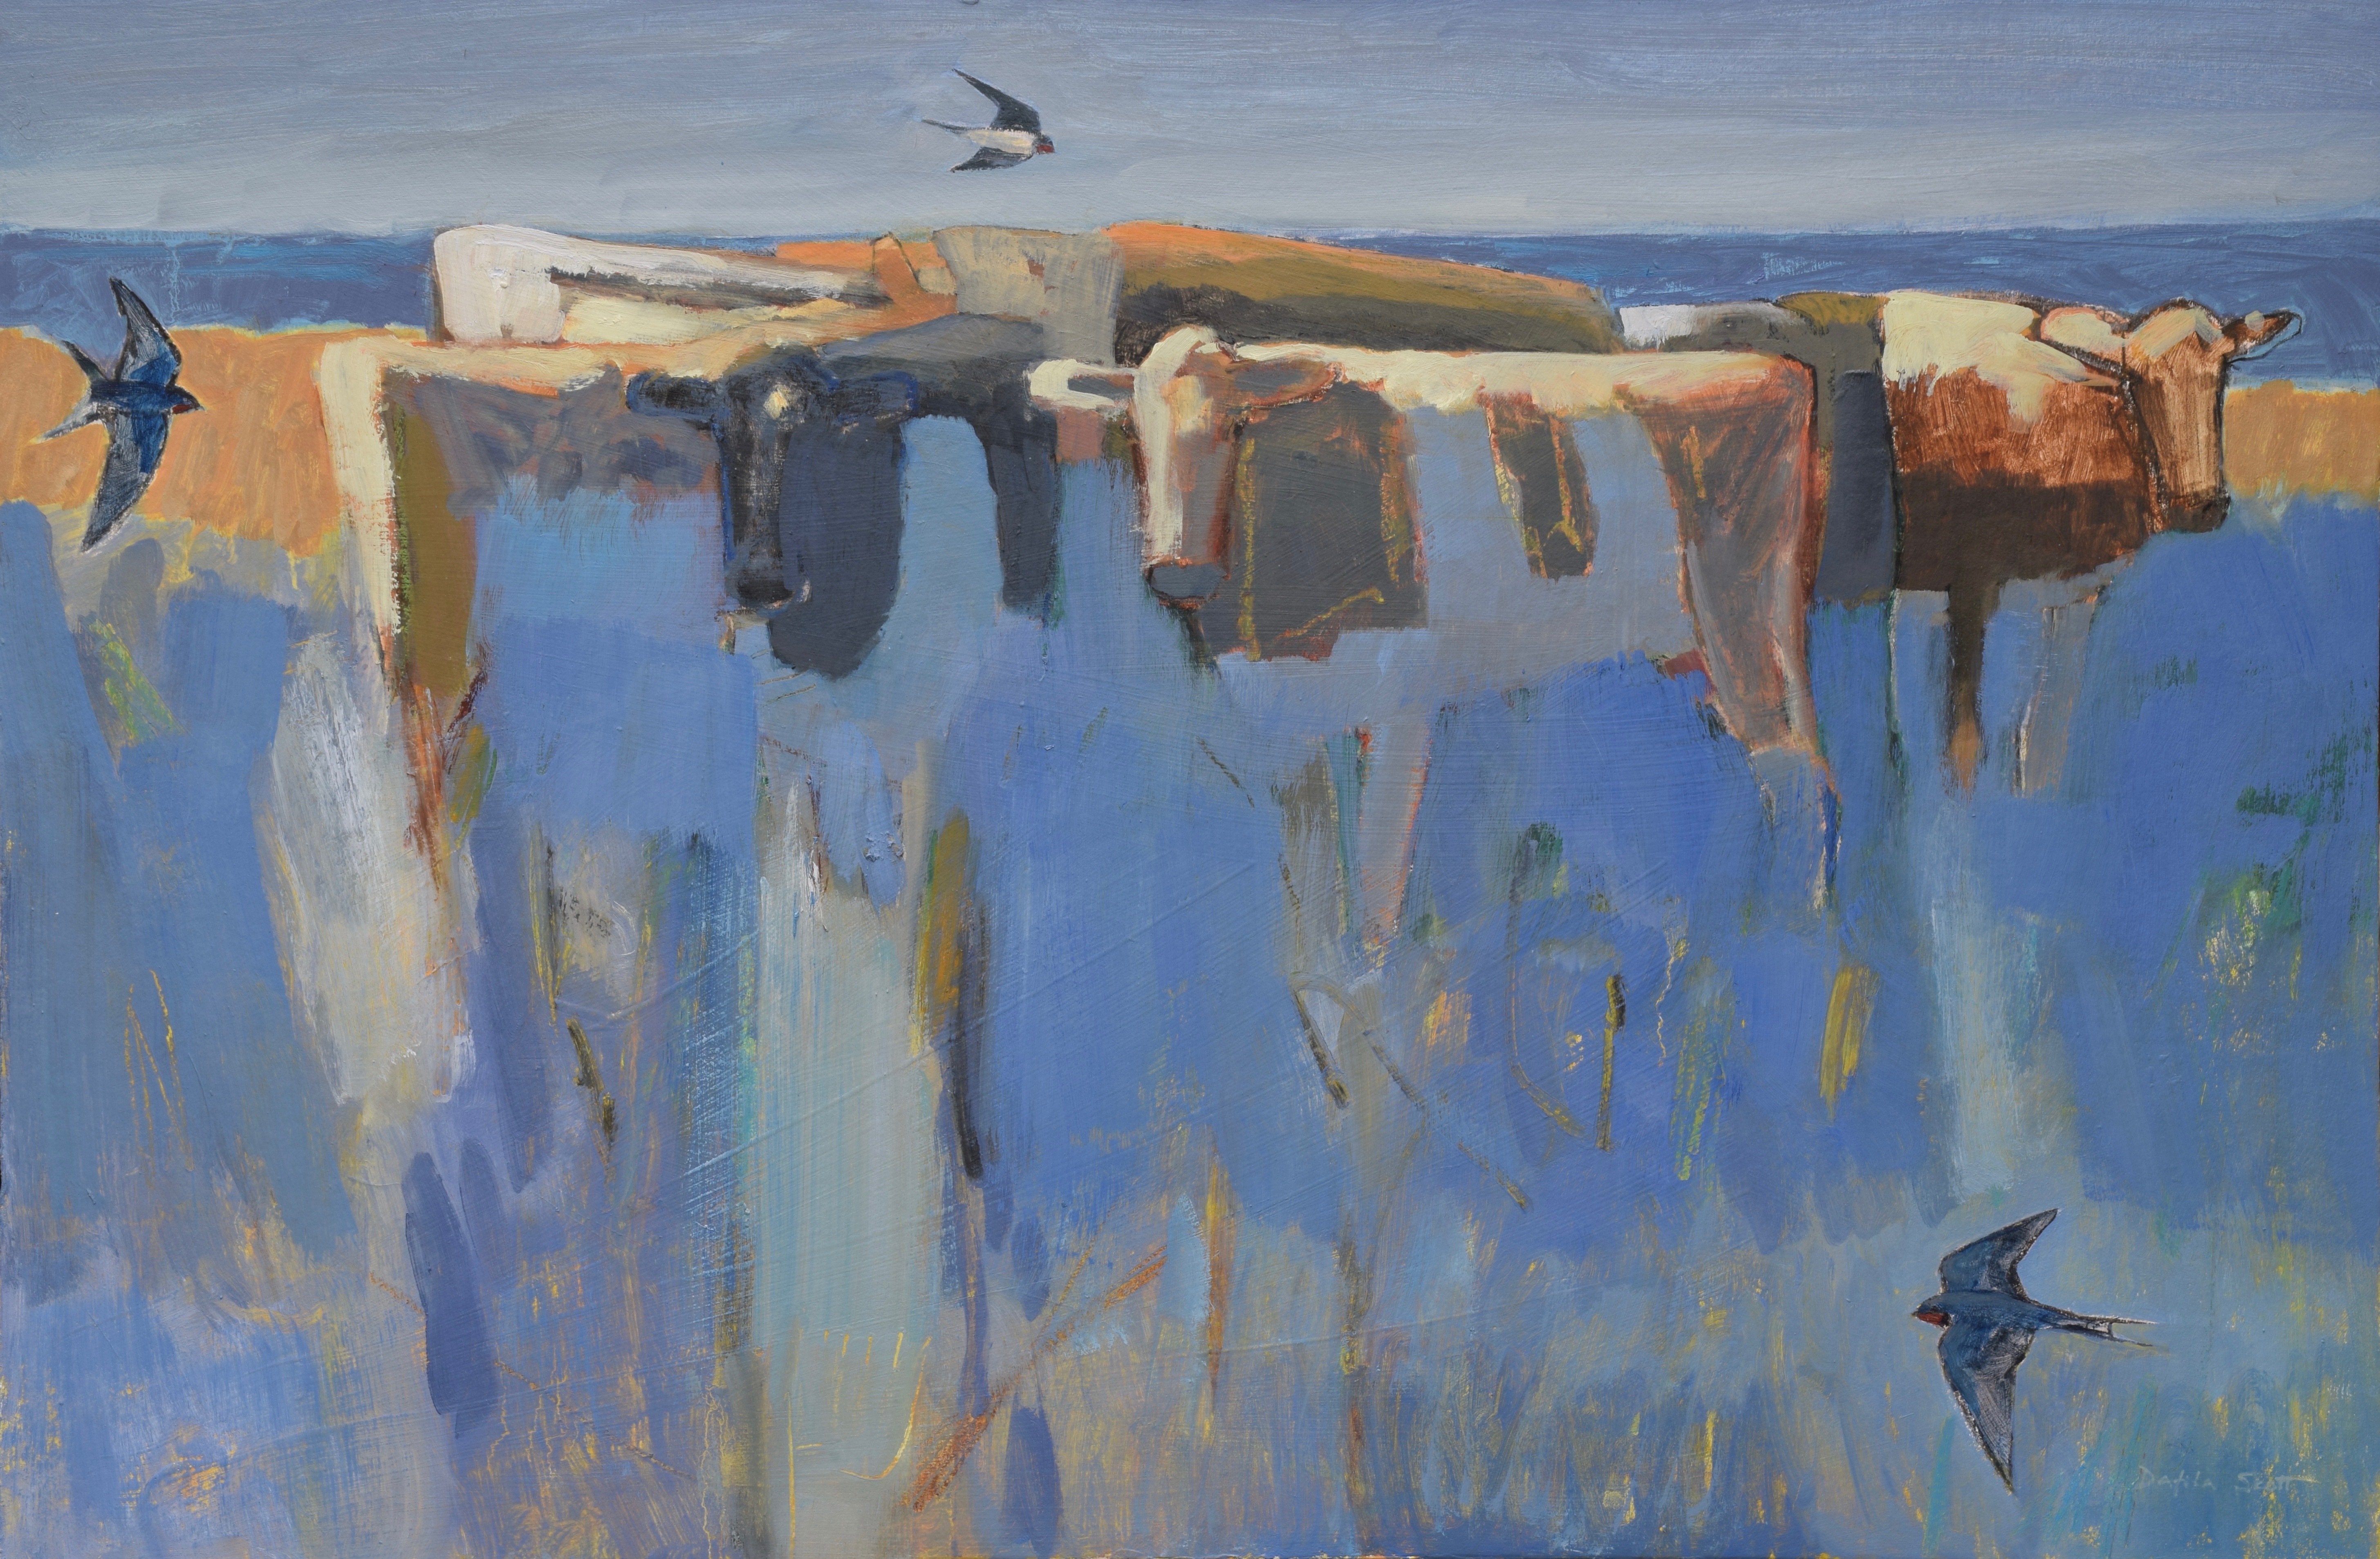 <p>Swallows and Cattle at the Coast by Dafila Scott</p>